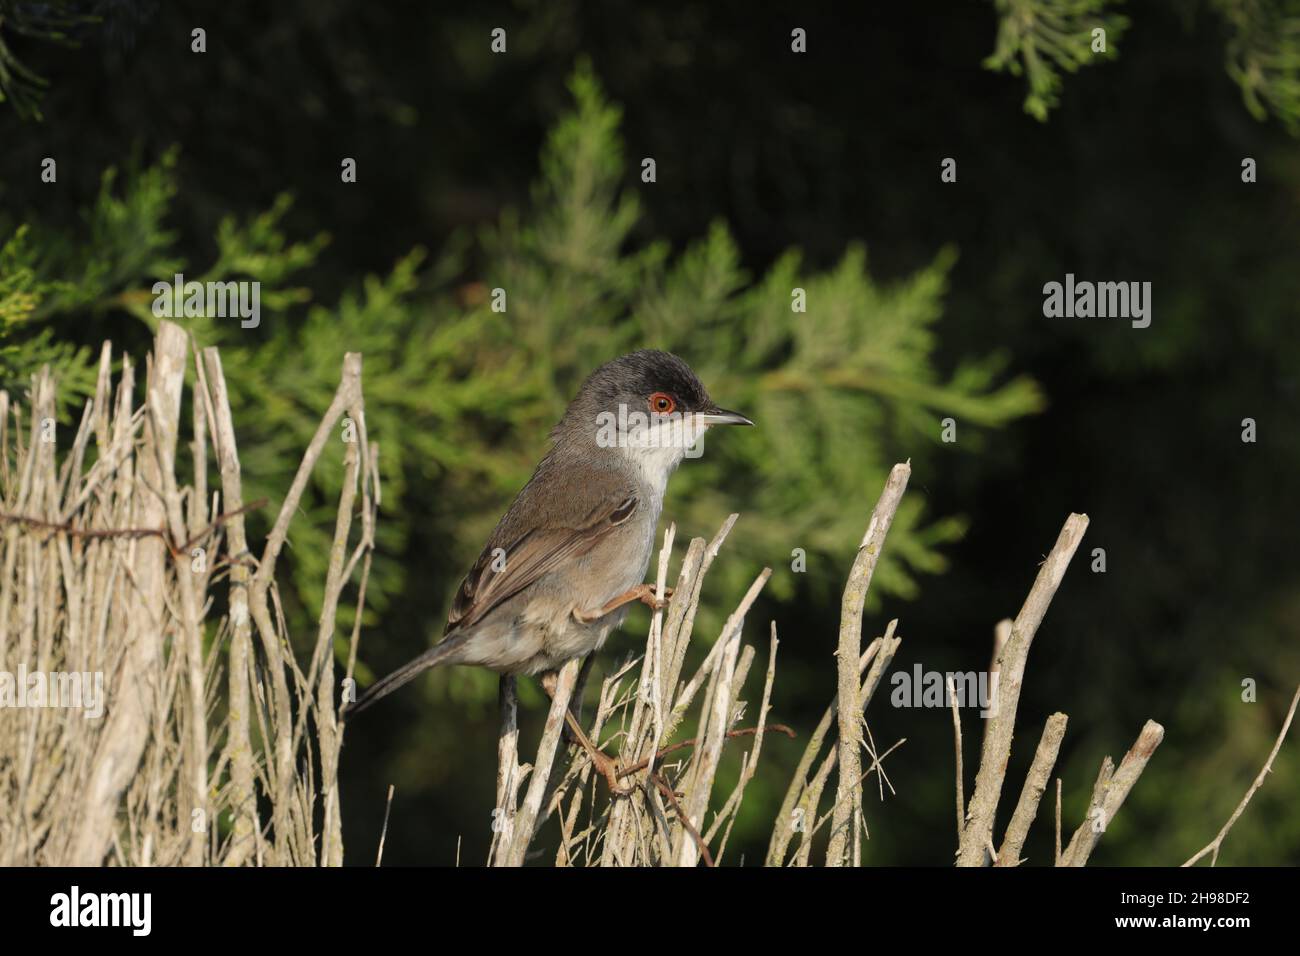 Sardinian warbler a common species on Majorca and around the Mediterranean. Stock Photo